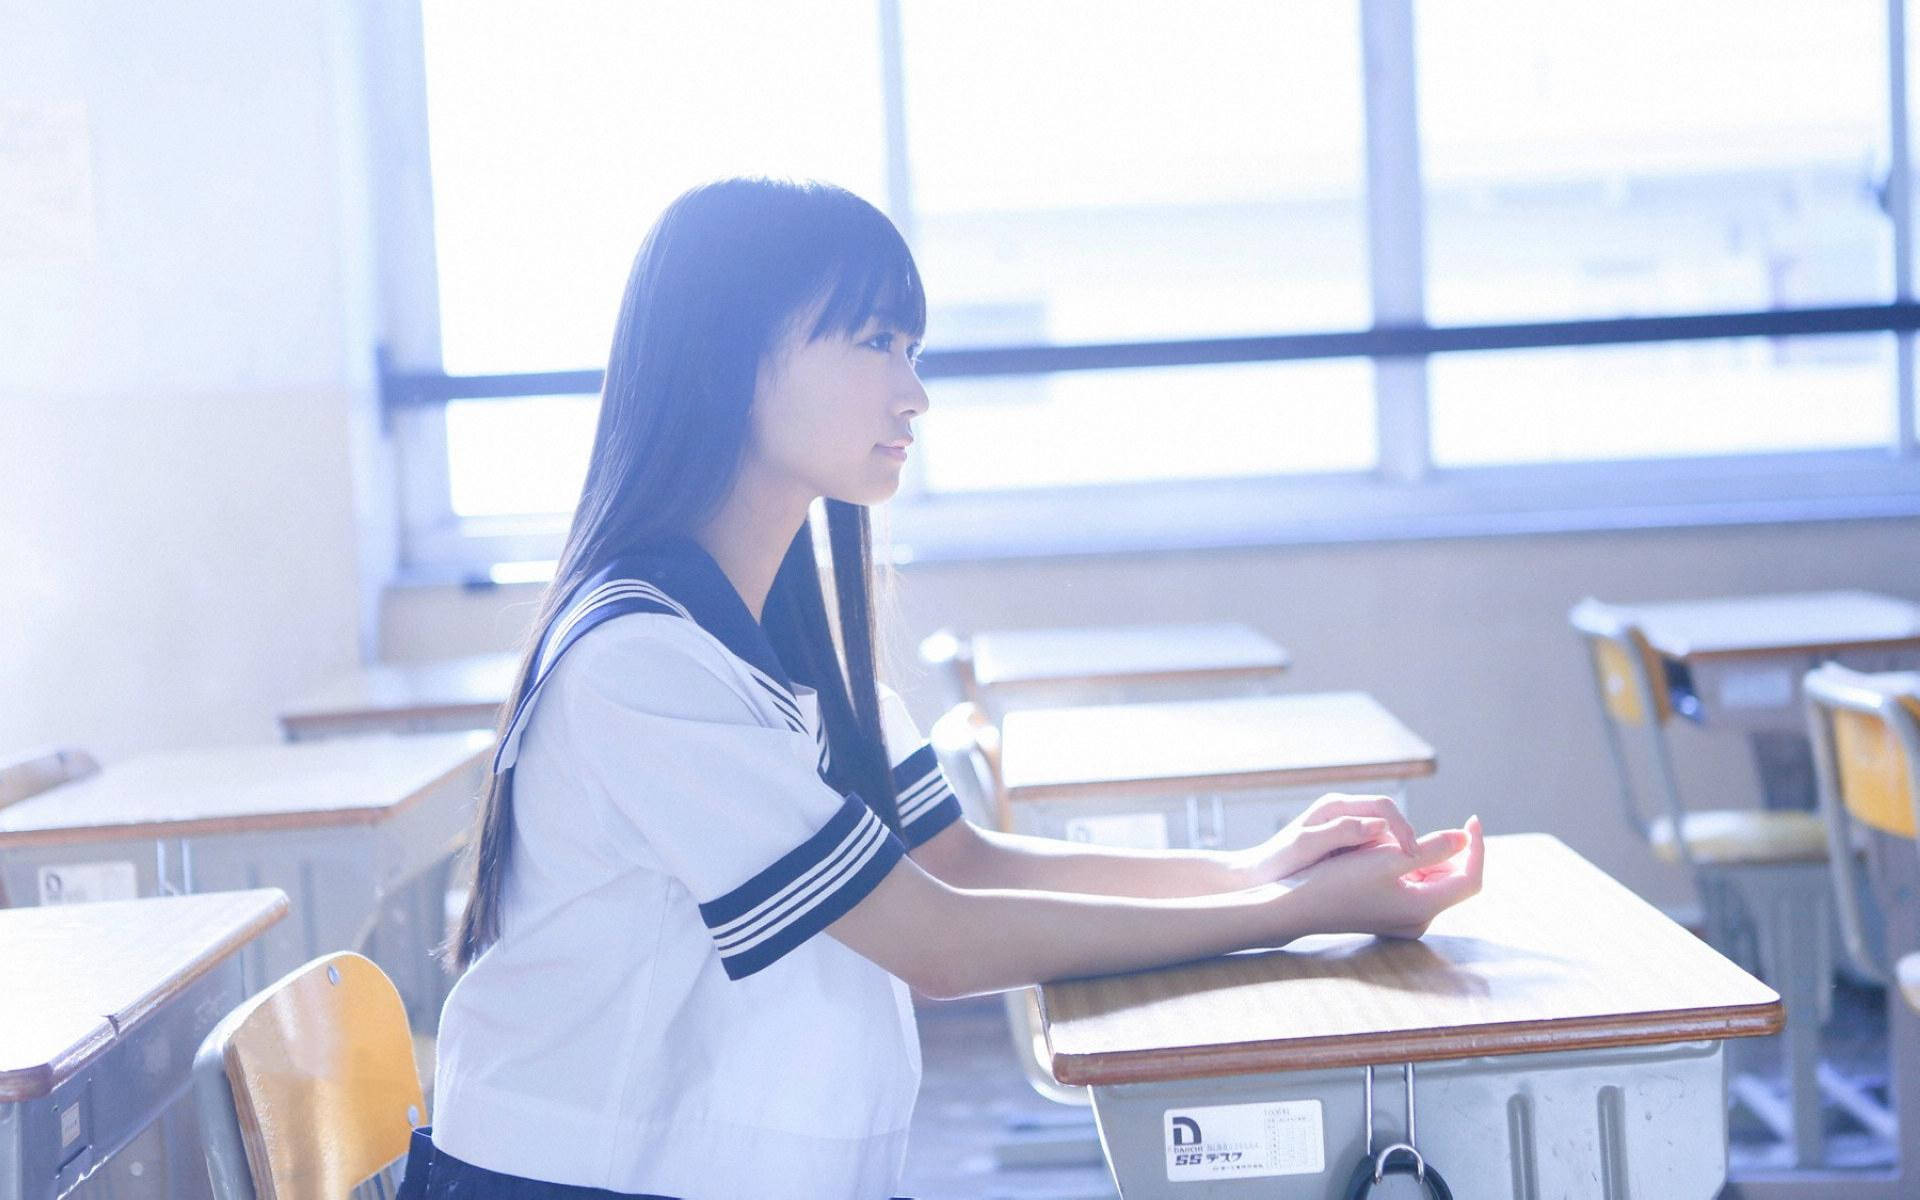 Japanese Girl In Classroom Background